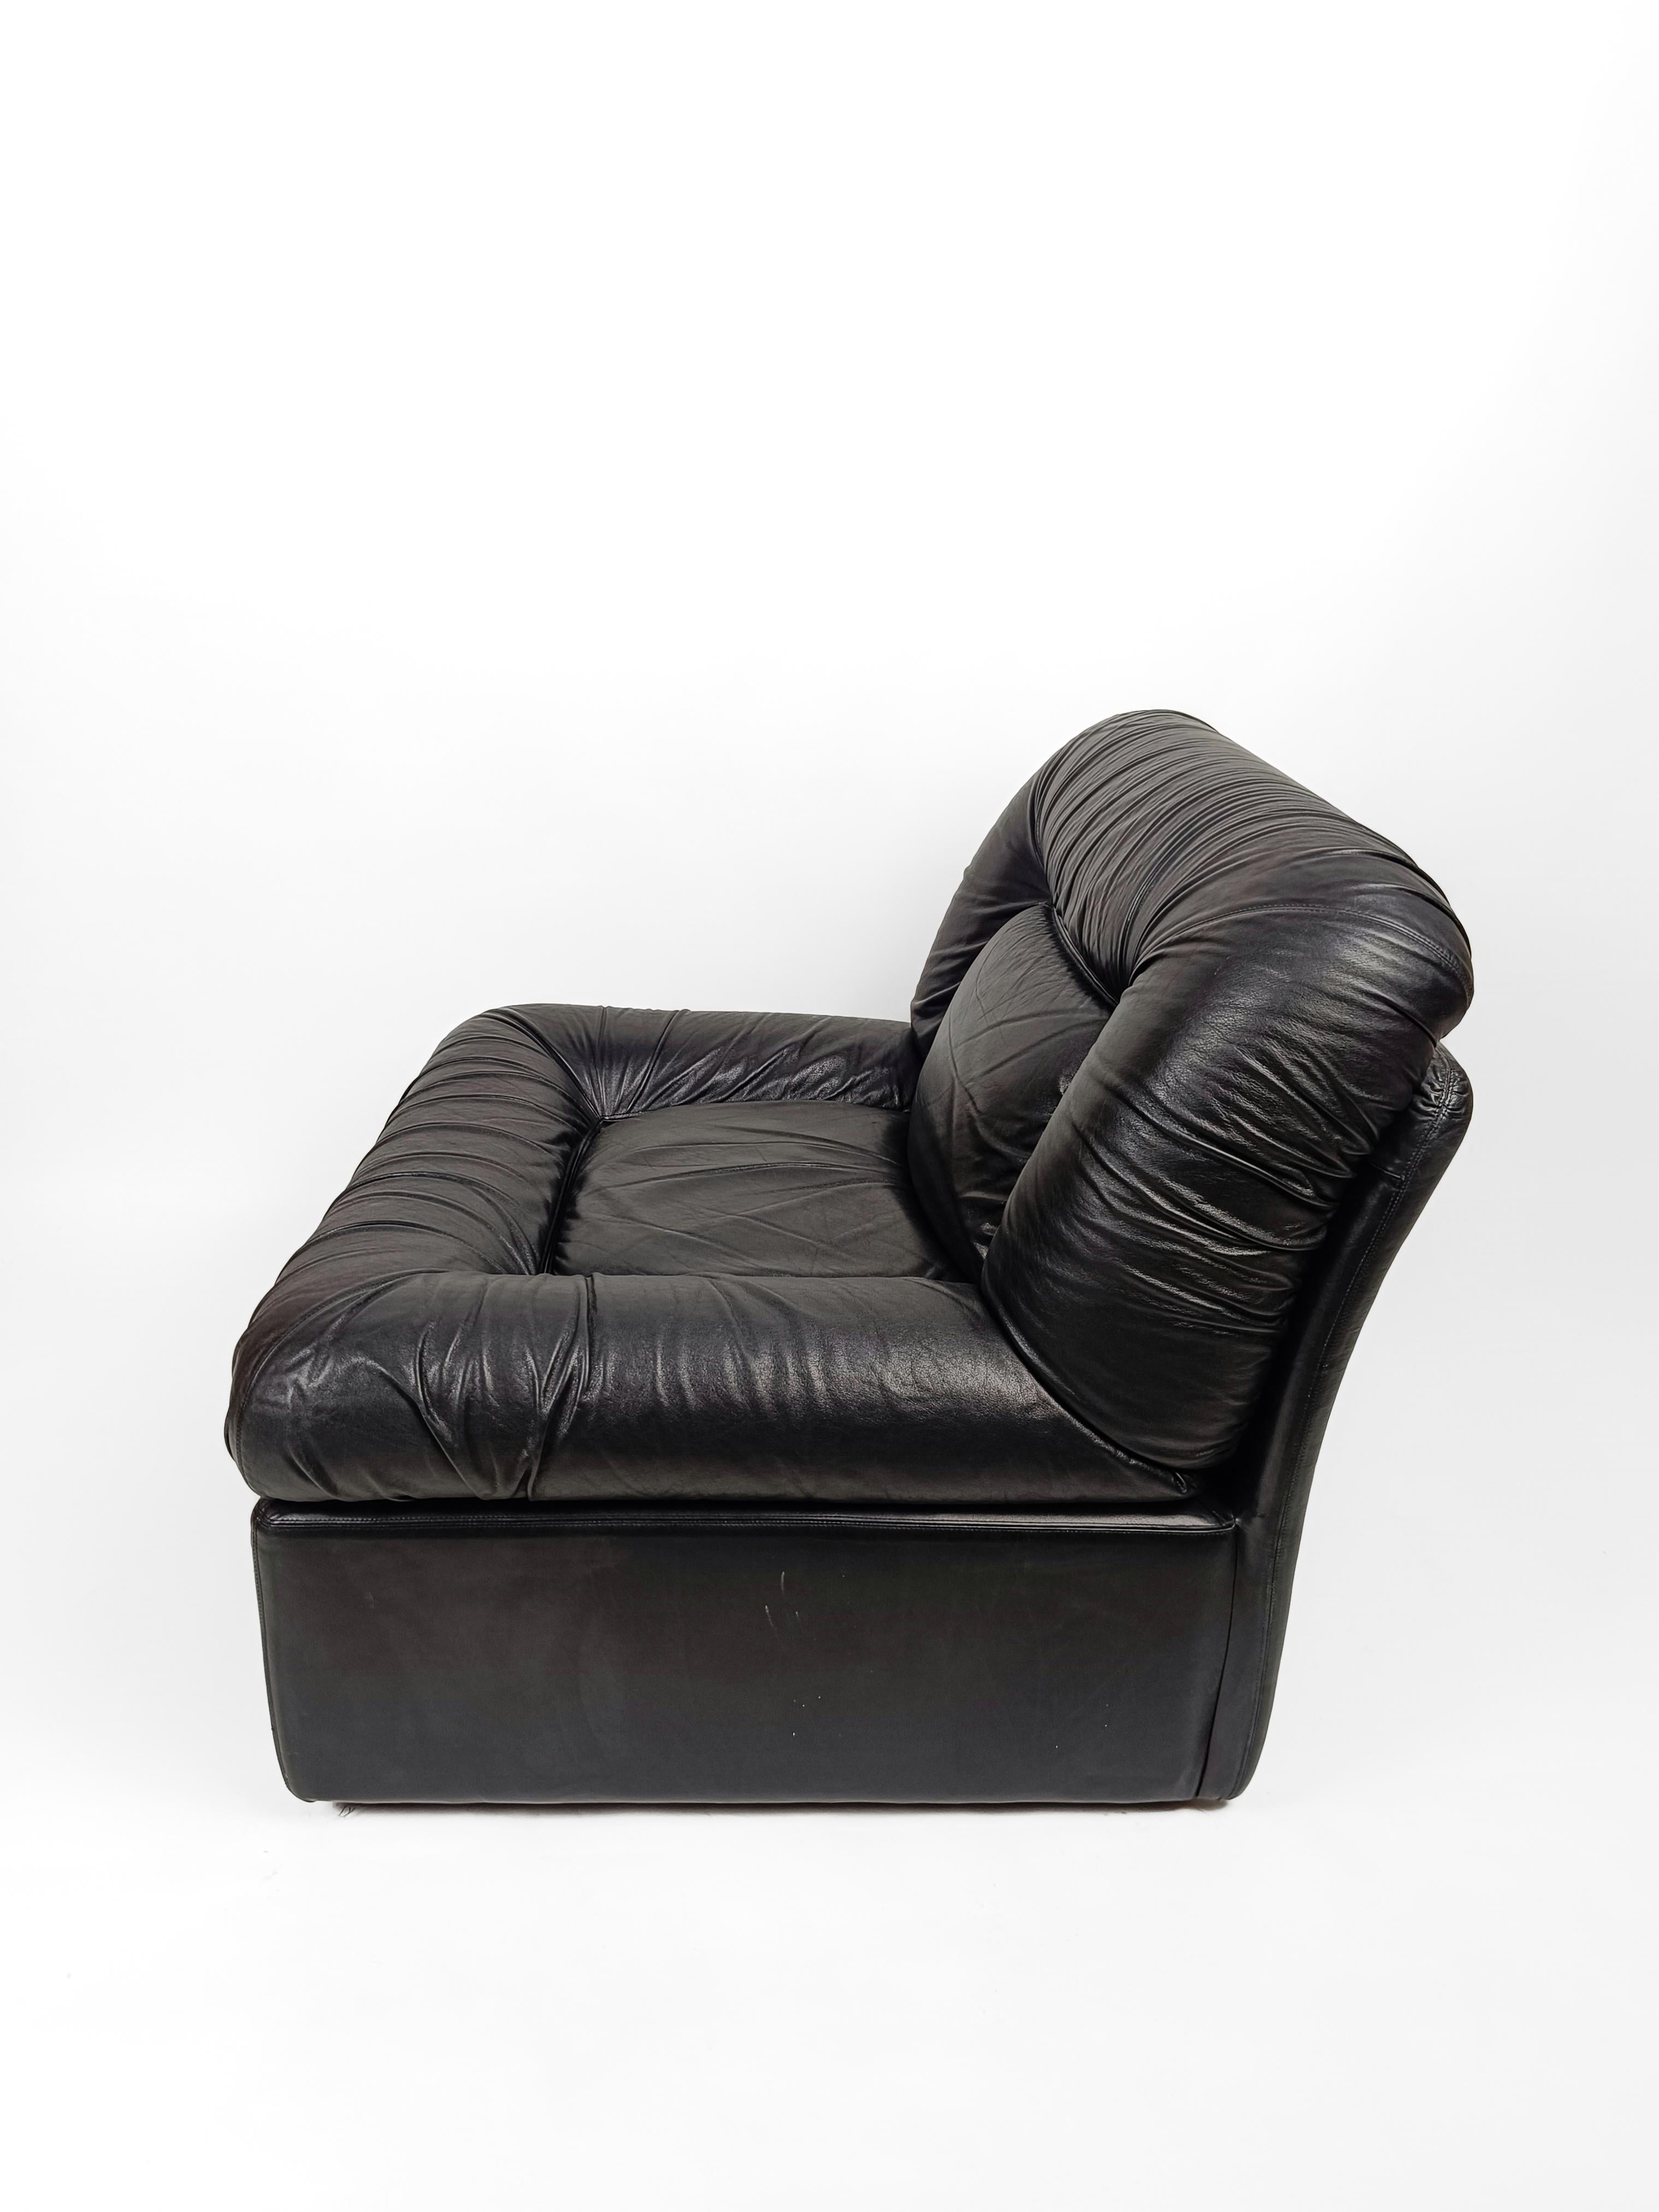 Italian Modular Lounge Chair in Black Leather model PANAREA by Lev & Lev, 1970s  In Good Condition For Sale In Roma, IT